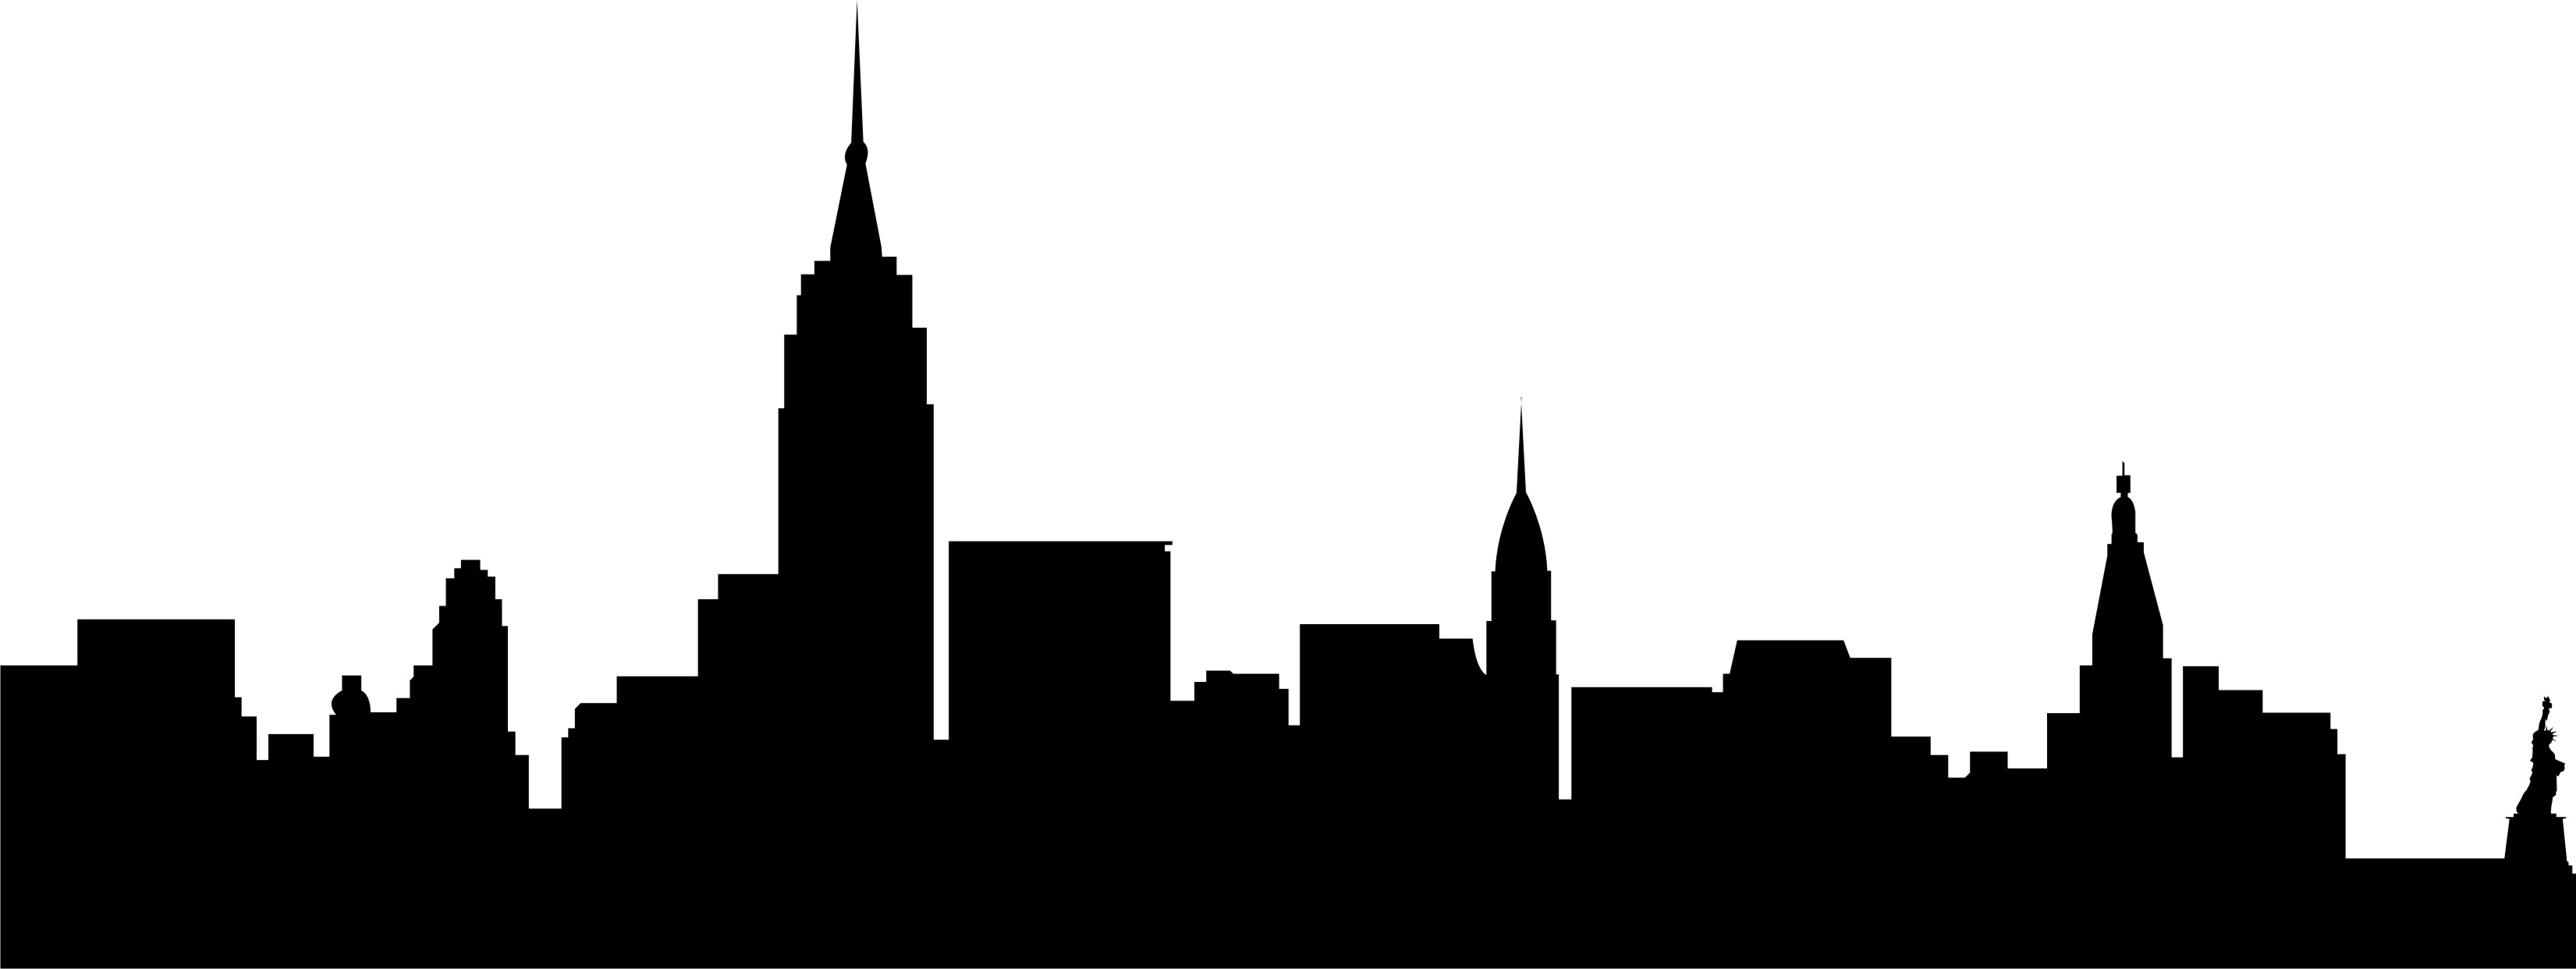 15 City Skyline Outline Free Cliparts That You Can Download To You